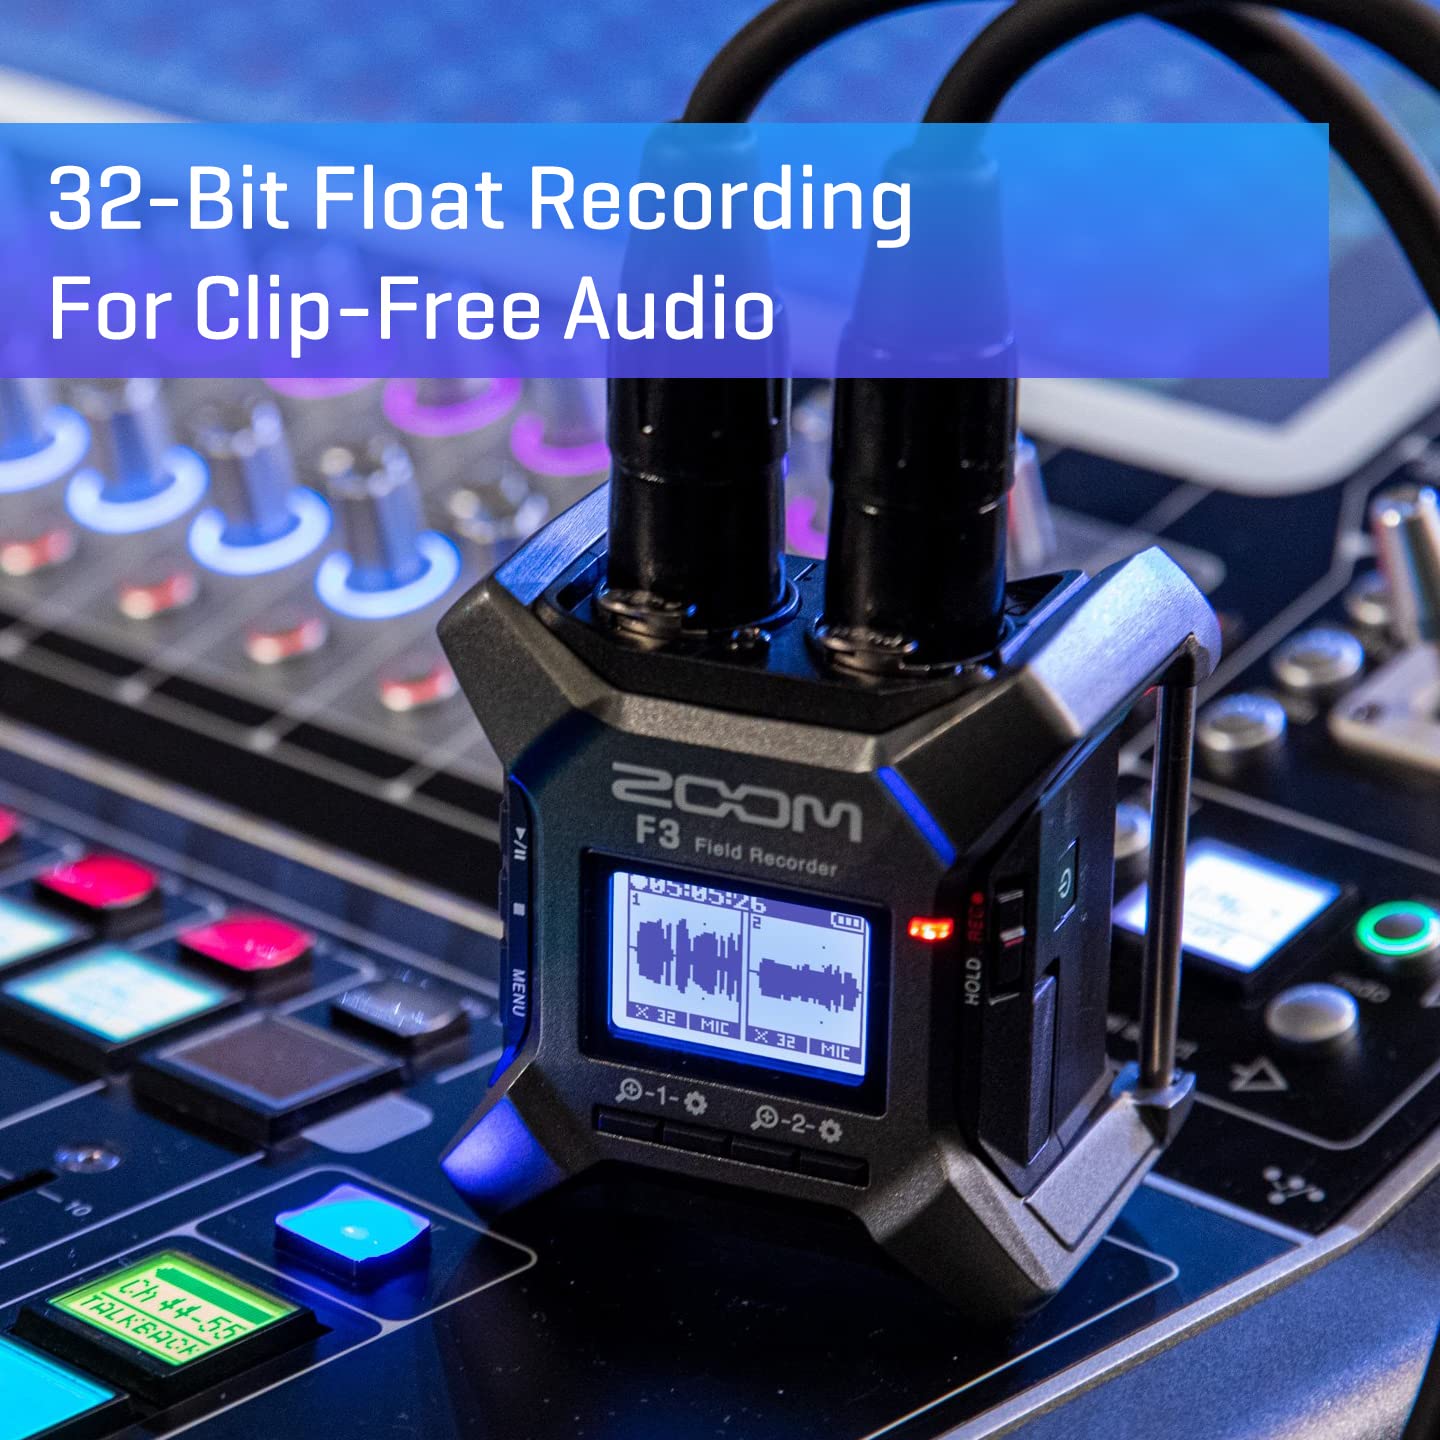 Zoom F3 Professional Field Recorder, 32-bit Float Recording, 2 Channel Recorder, Dual AD Converters, 2 Locking XLR/TRS Inputs, Battery Powered, Wireless Control